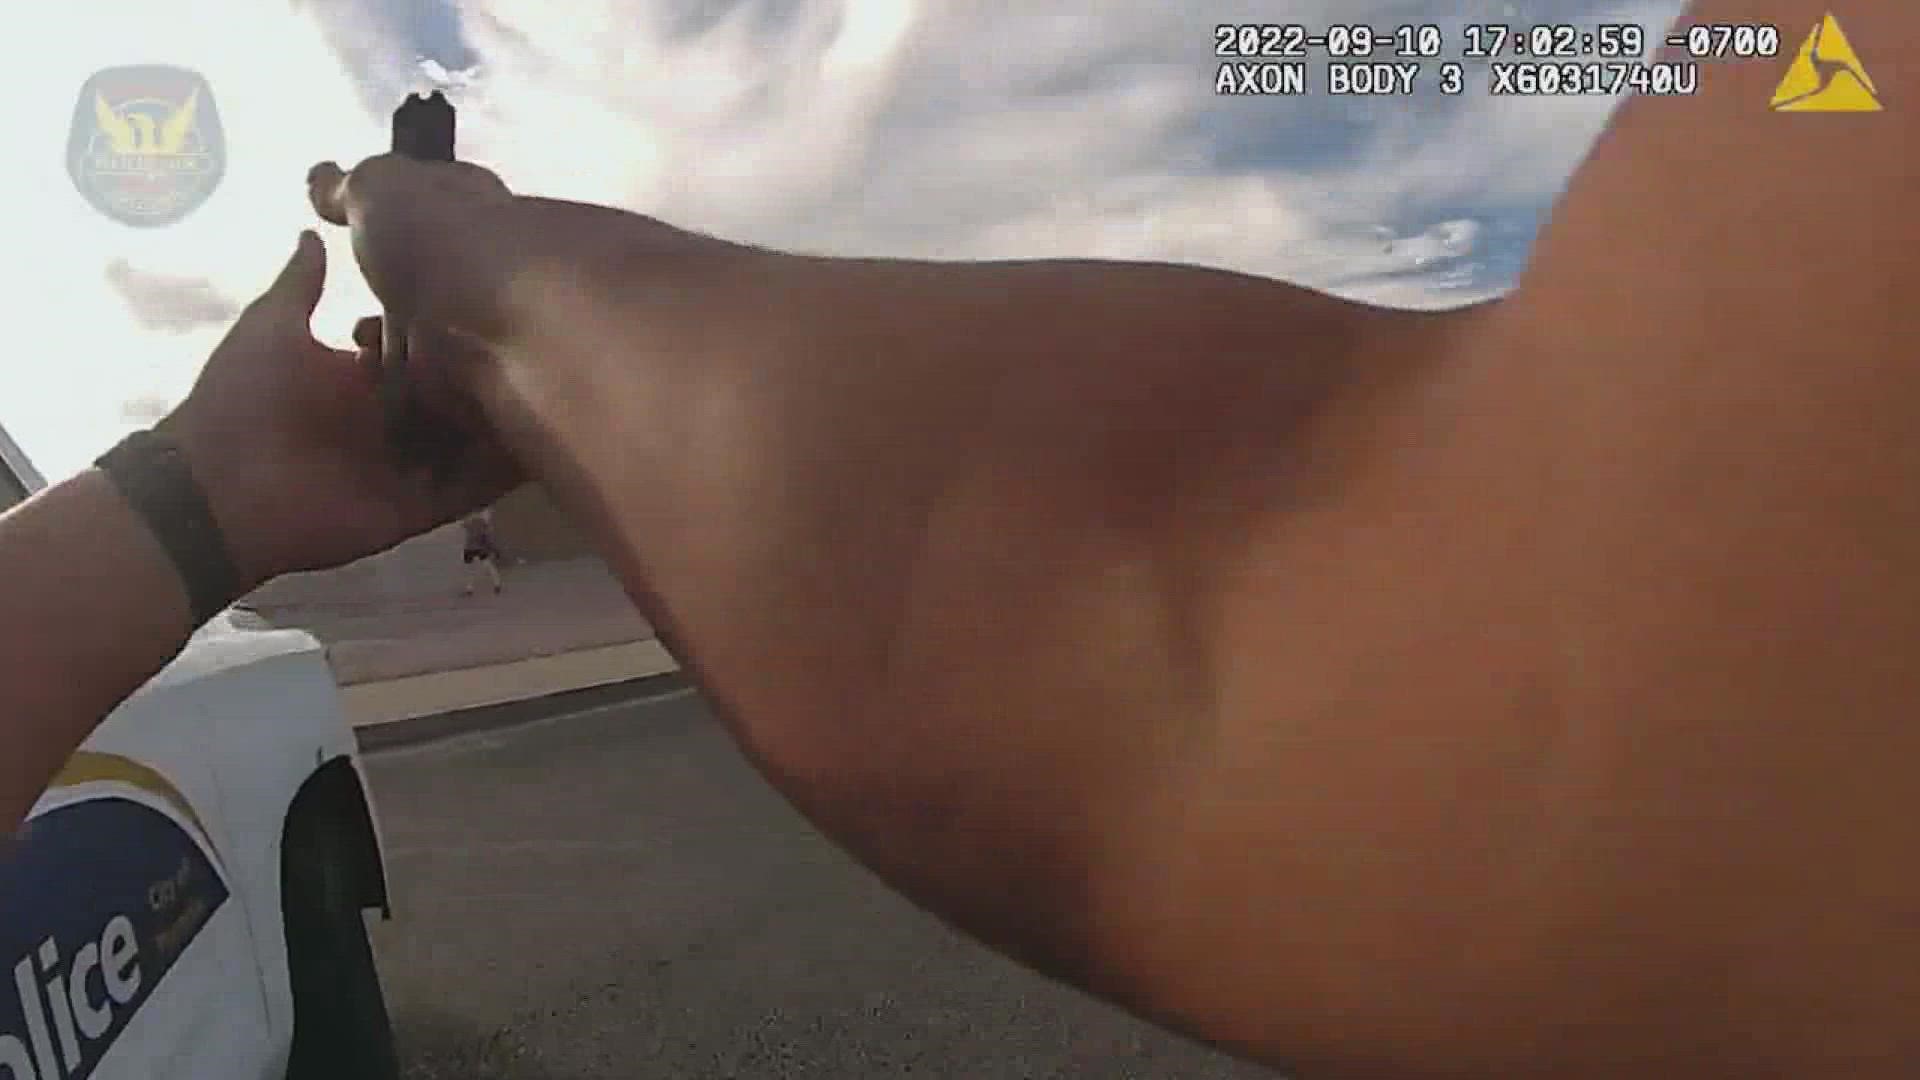 Phoenix police have released some body-worn camera footage of officers fatally shooting a 40-year-old man holding a sword.